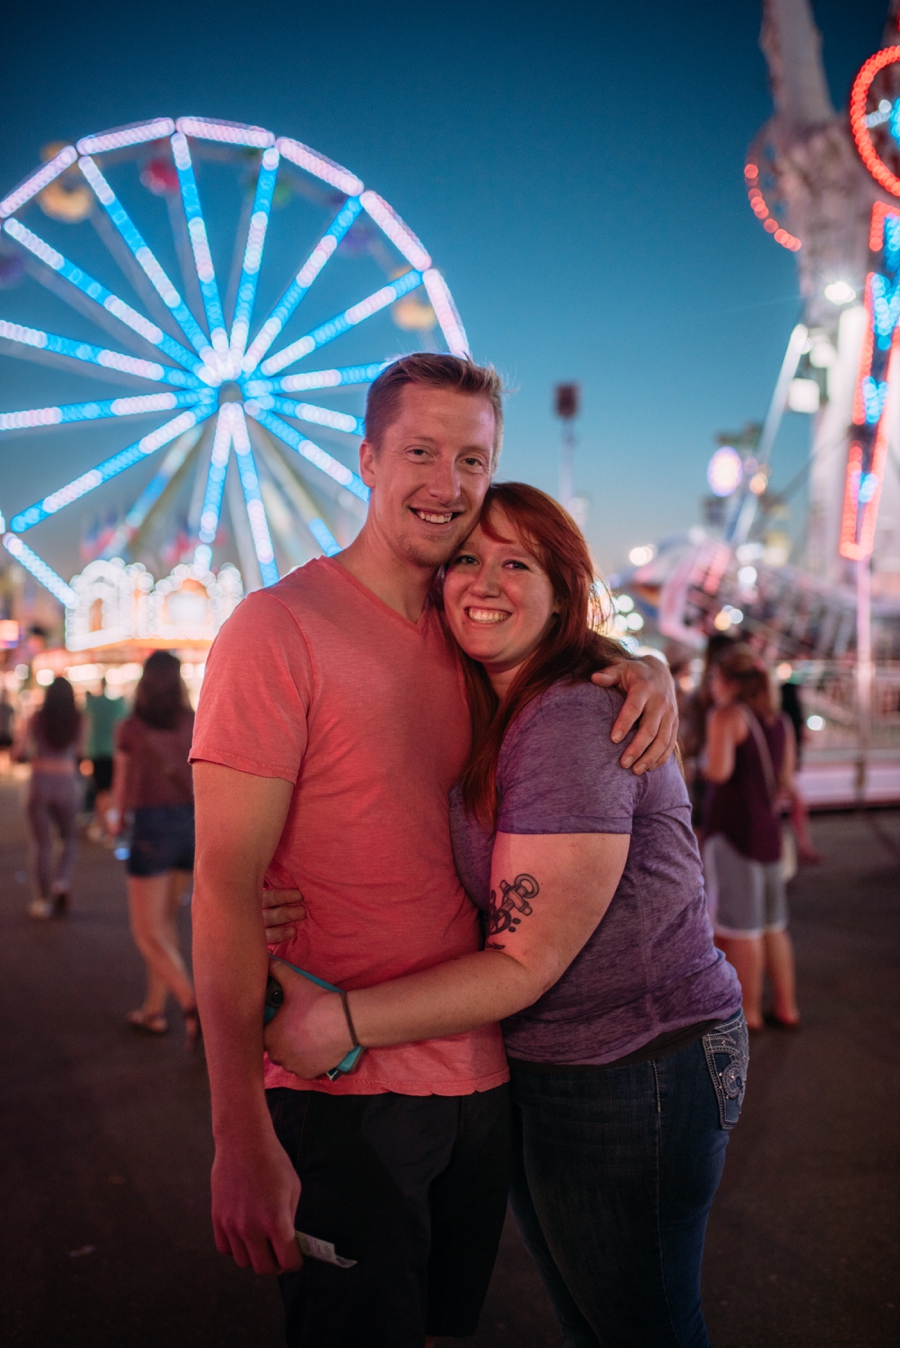 Couple hugging at minnesota state fair with ferris wheel in the background